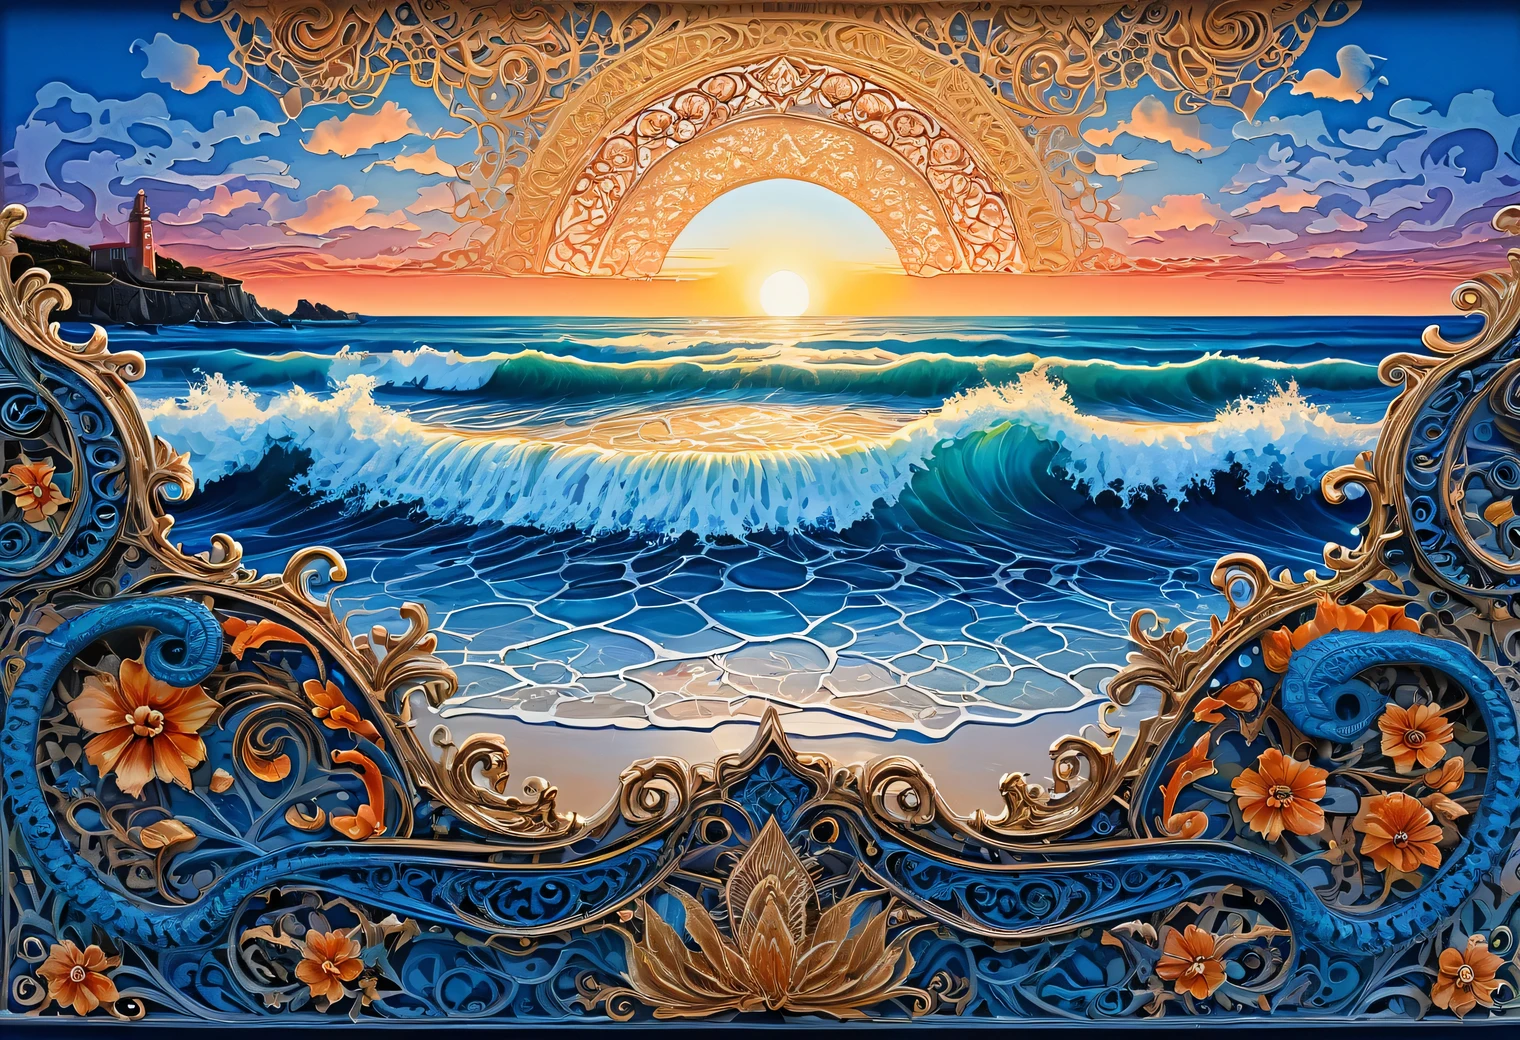 A two-layer painting with the effect of surreal volume by superimposing layers with different styles, a surreal grotesque image ((Blue Coast)) at sunset on one layer surrounded by an elegant intricate patterned edging made by the second layer, the combination of two layers creates the illusion of volume, canvas, acrylic, clarity, filigree